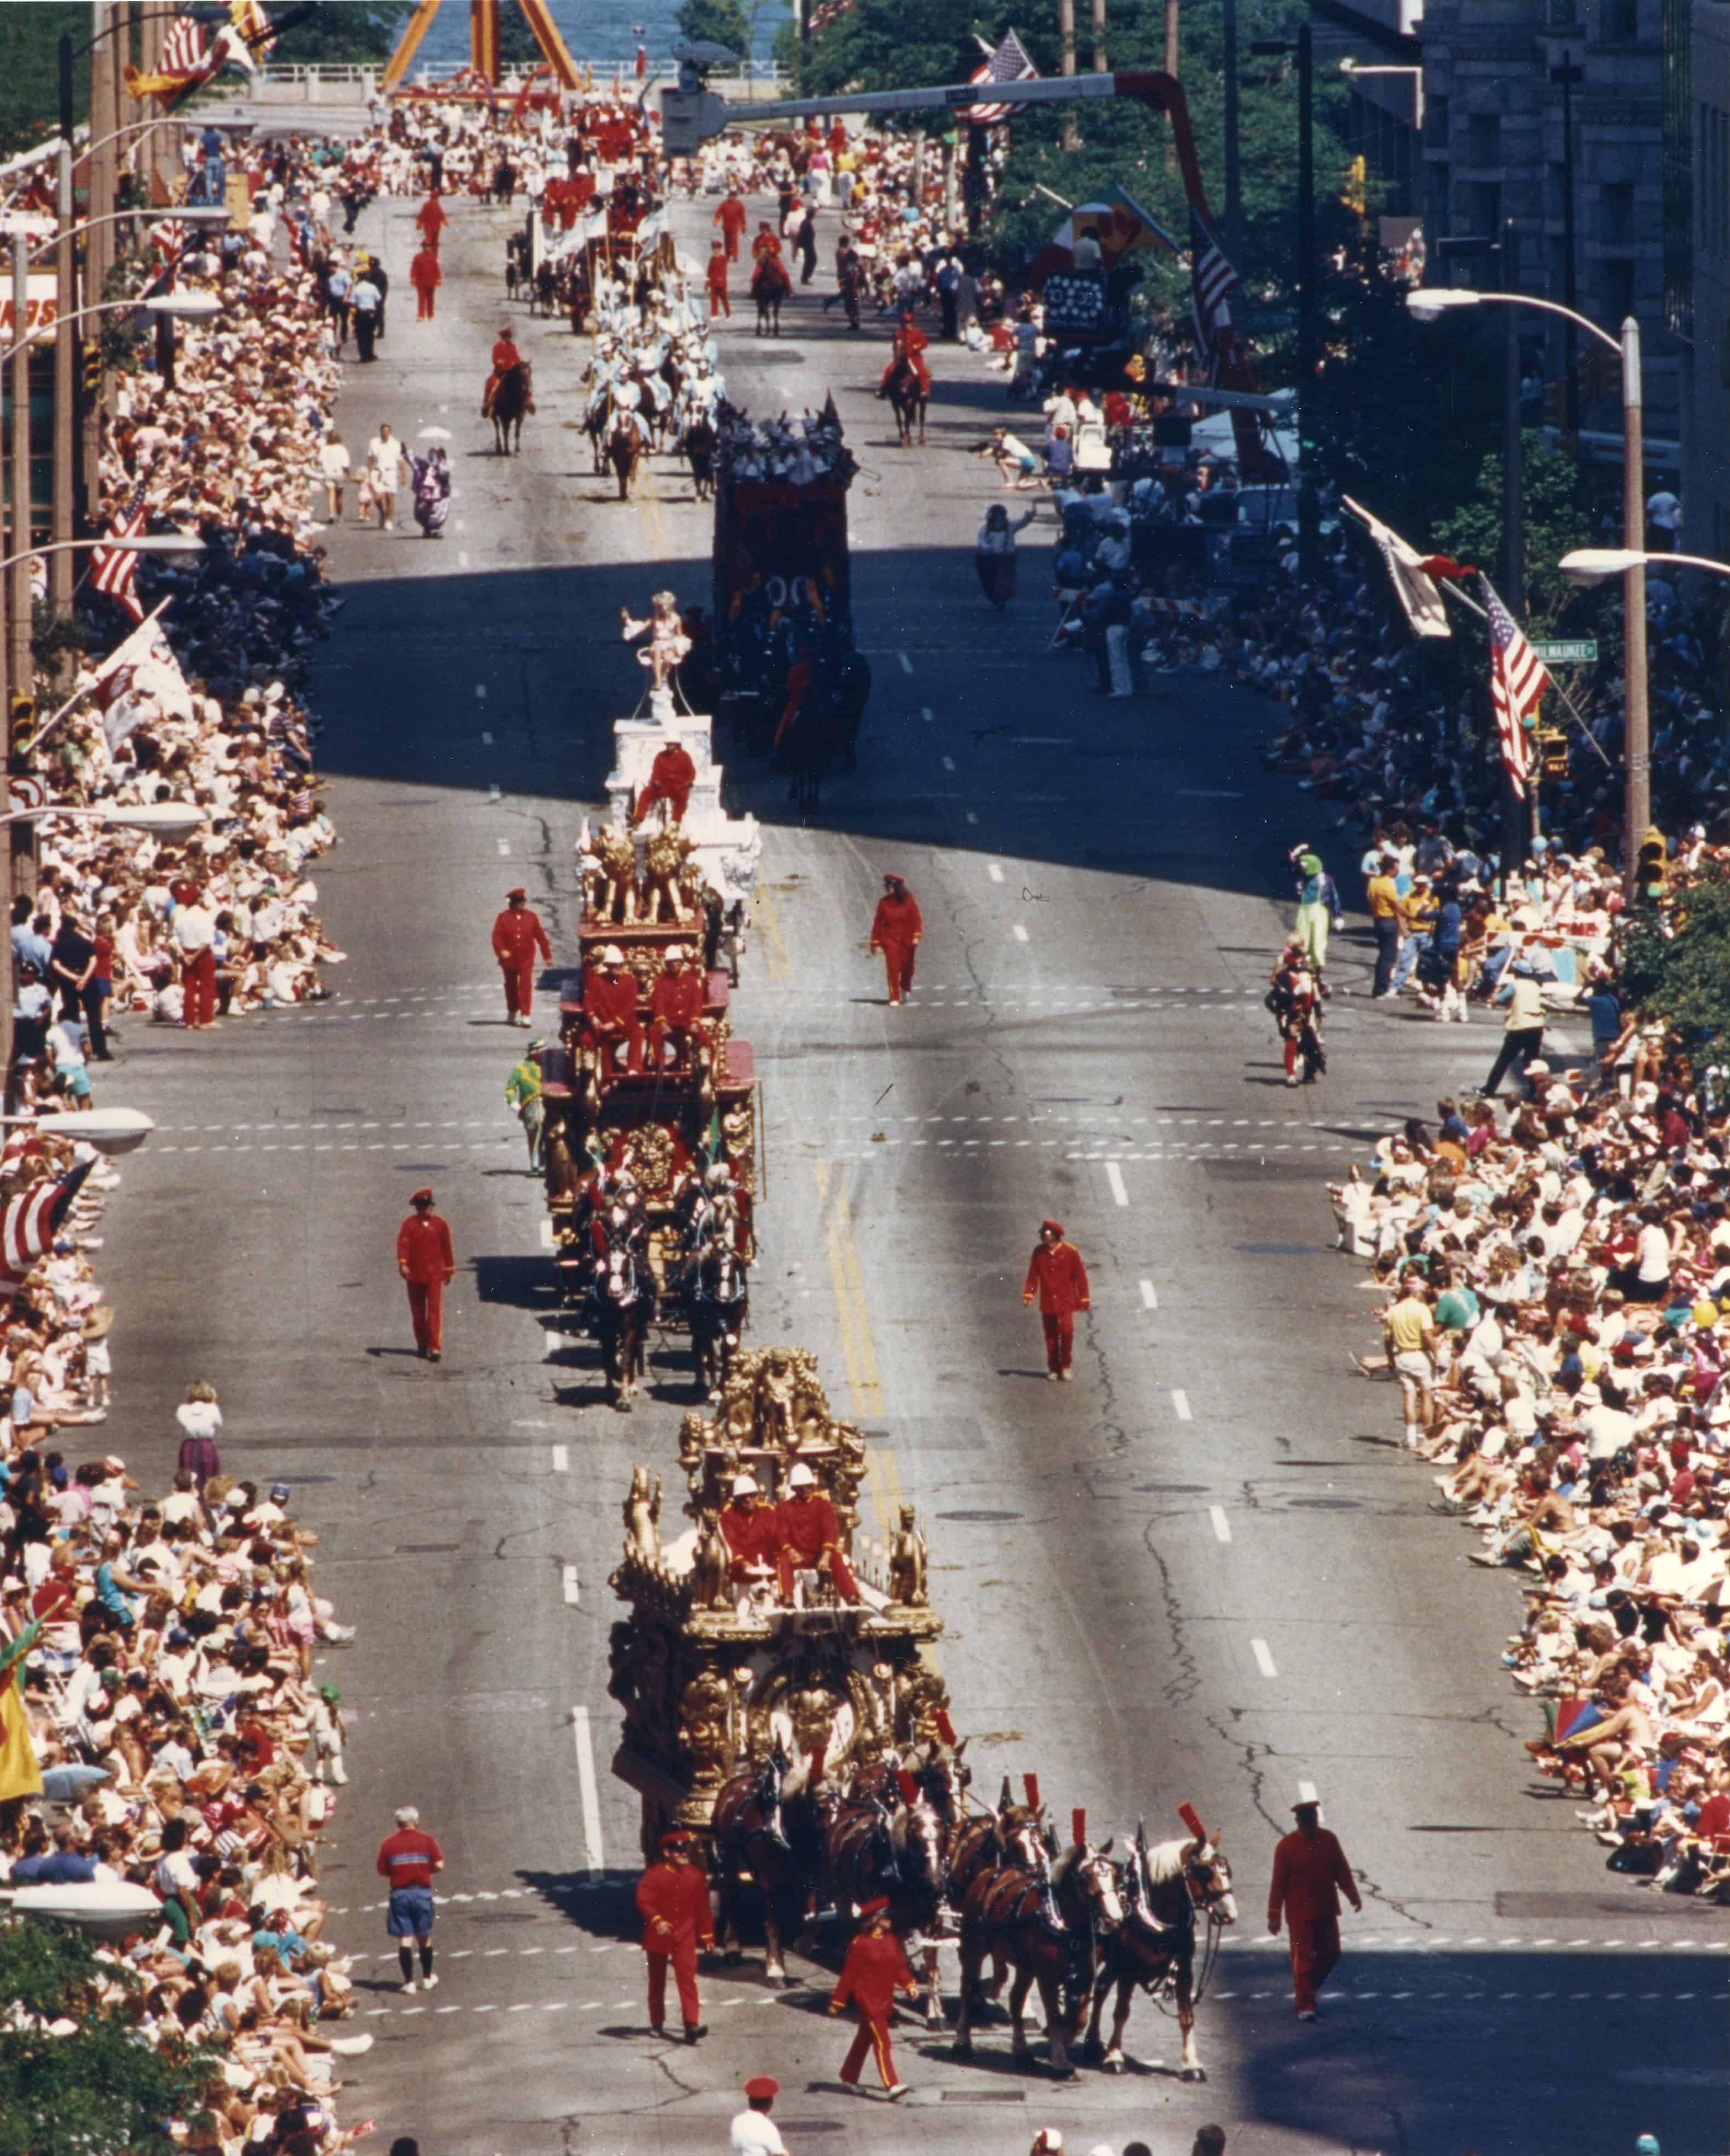 The Circus Parade on Wisconsin Ave., late 1990s. Image courtesy of Jewish Museum Milwaukee, Barkin Family Collection